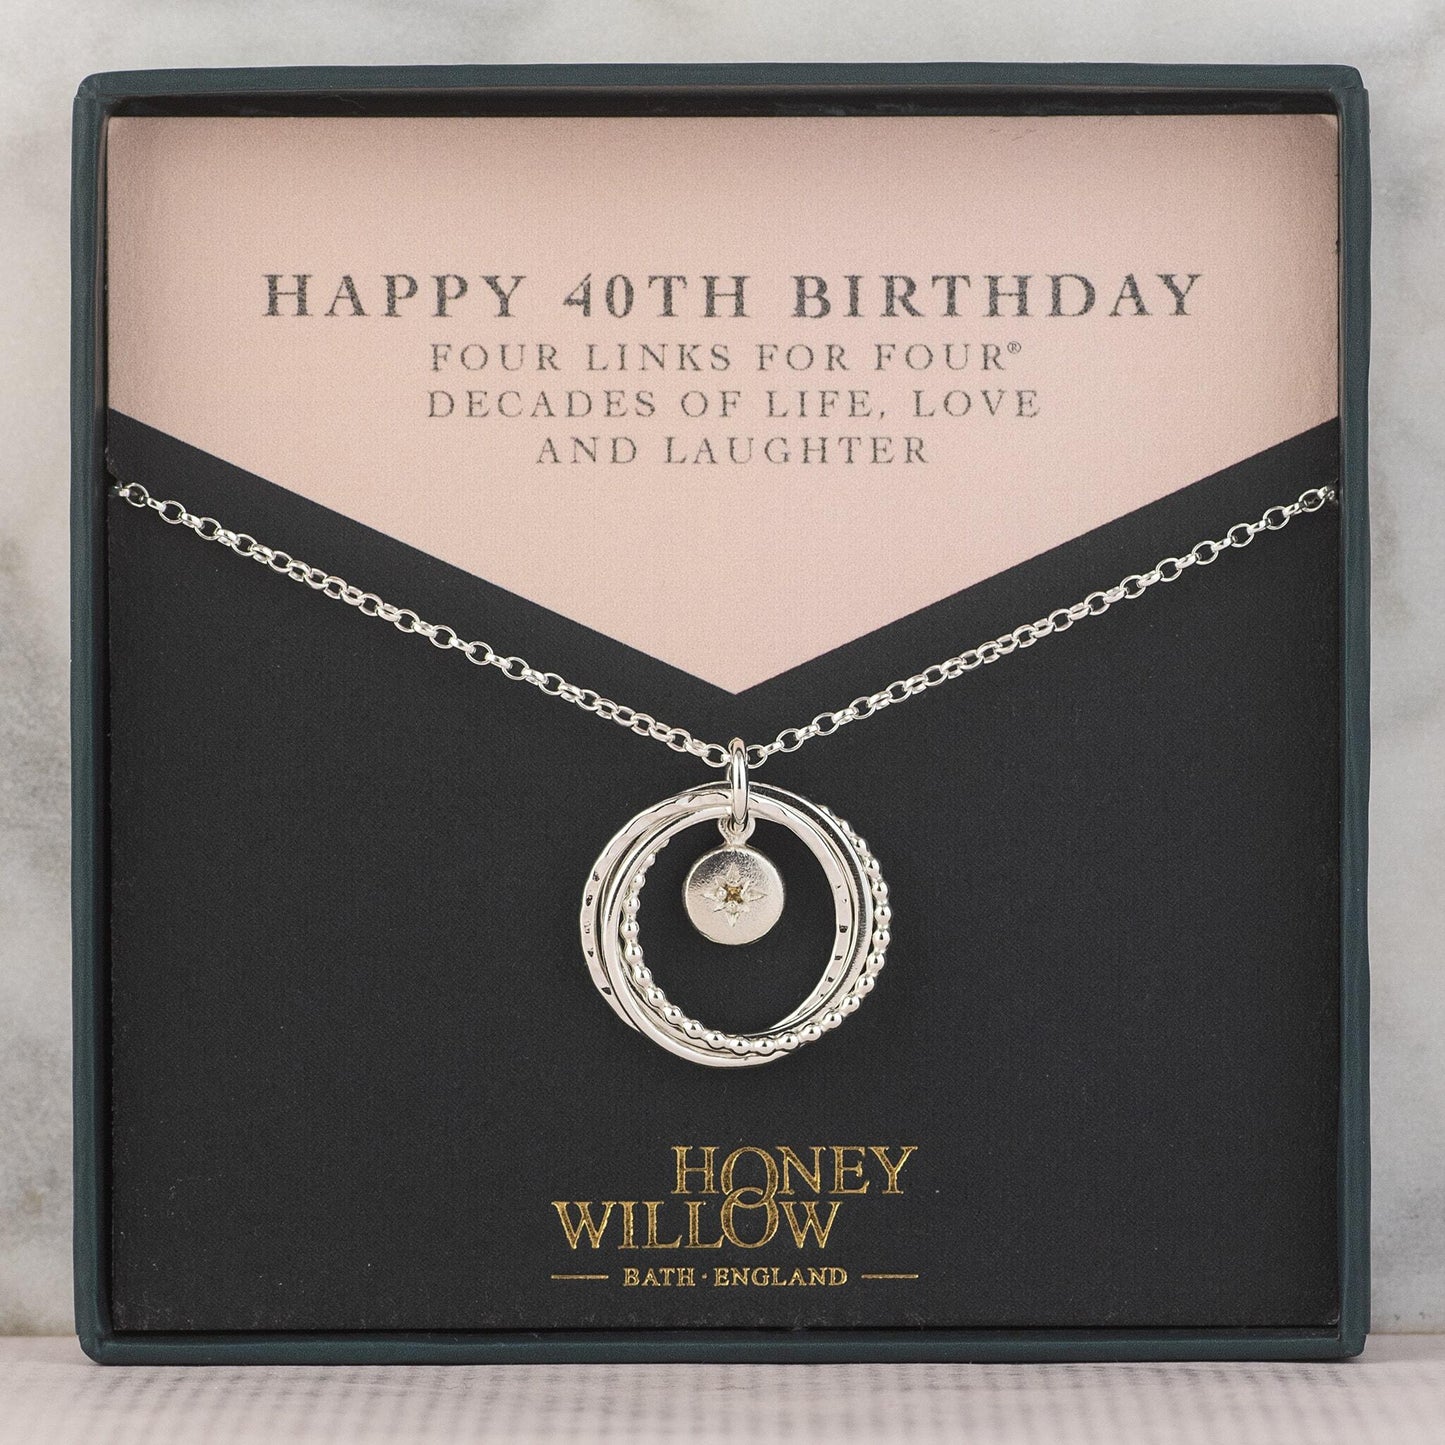 40th Birthday Birthstone Necklace - Silver - The Original 4 Links for 4 Decades Necklace